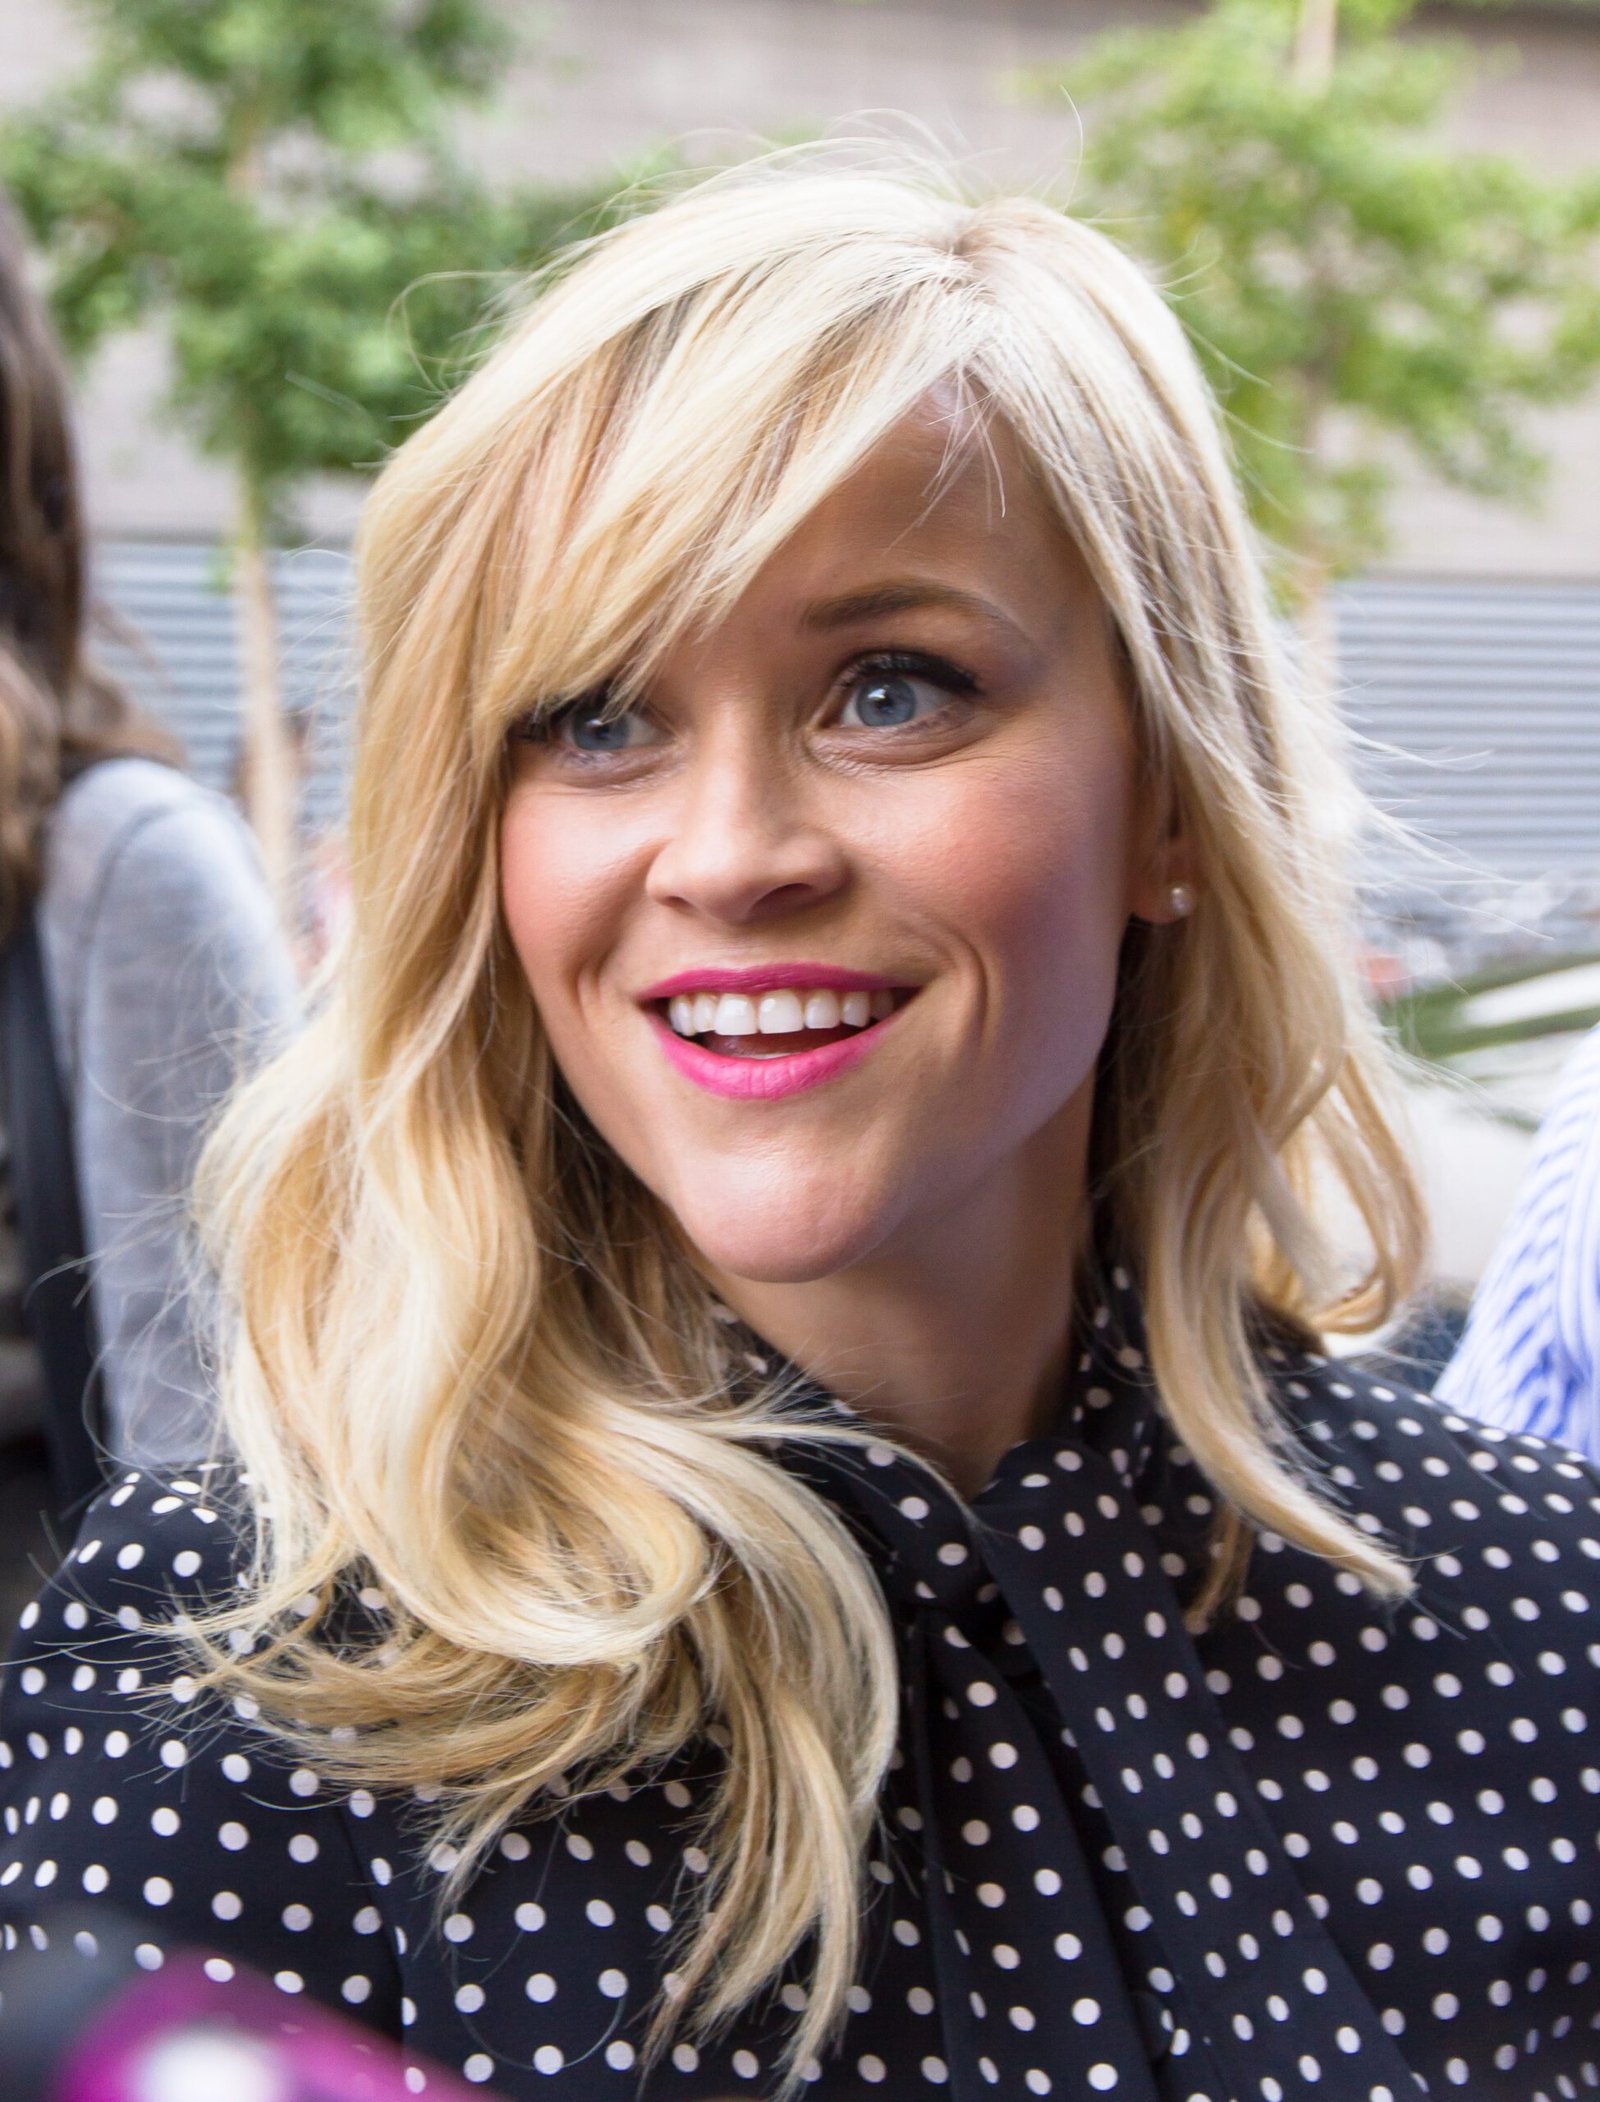 Is Reese Witherspoon Dead? Age, Birthplace and Zodiac Sign